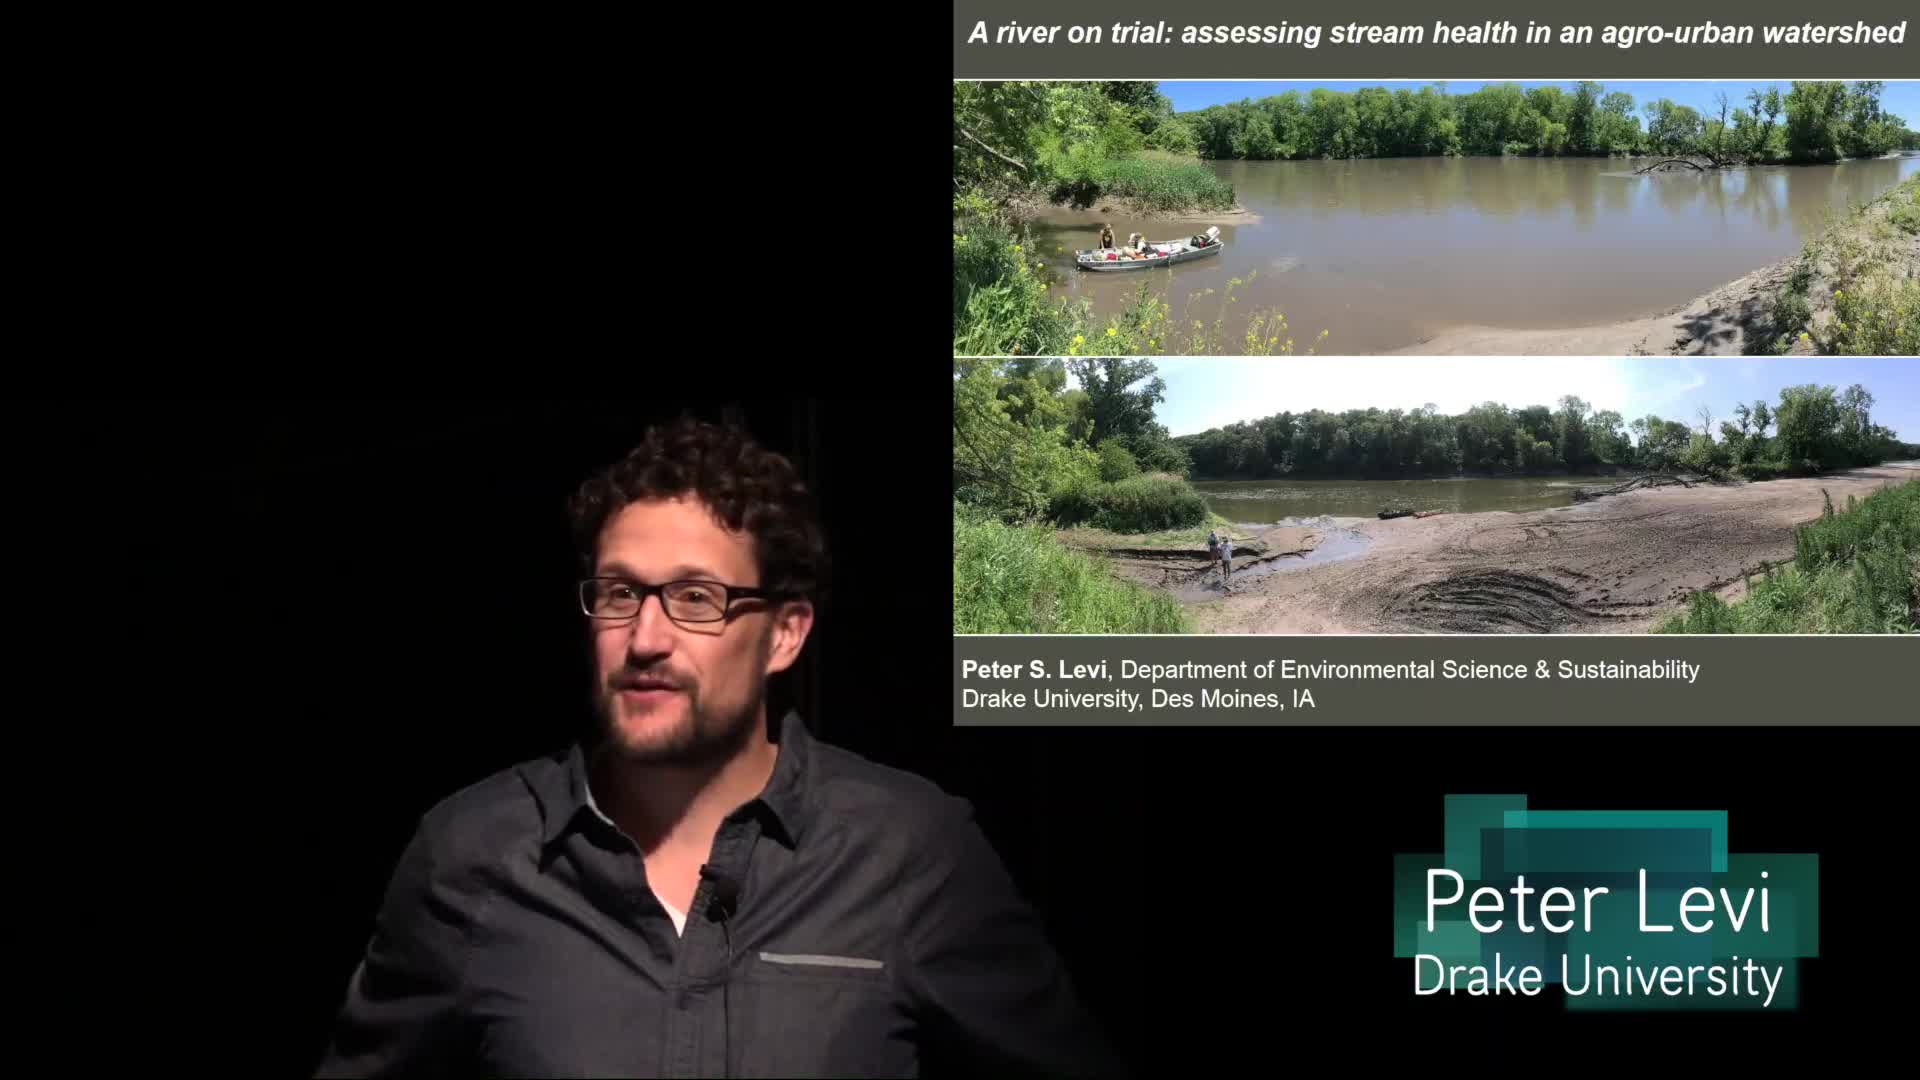 A river on trial: Assessing stream health in an agro-urban landscape